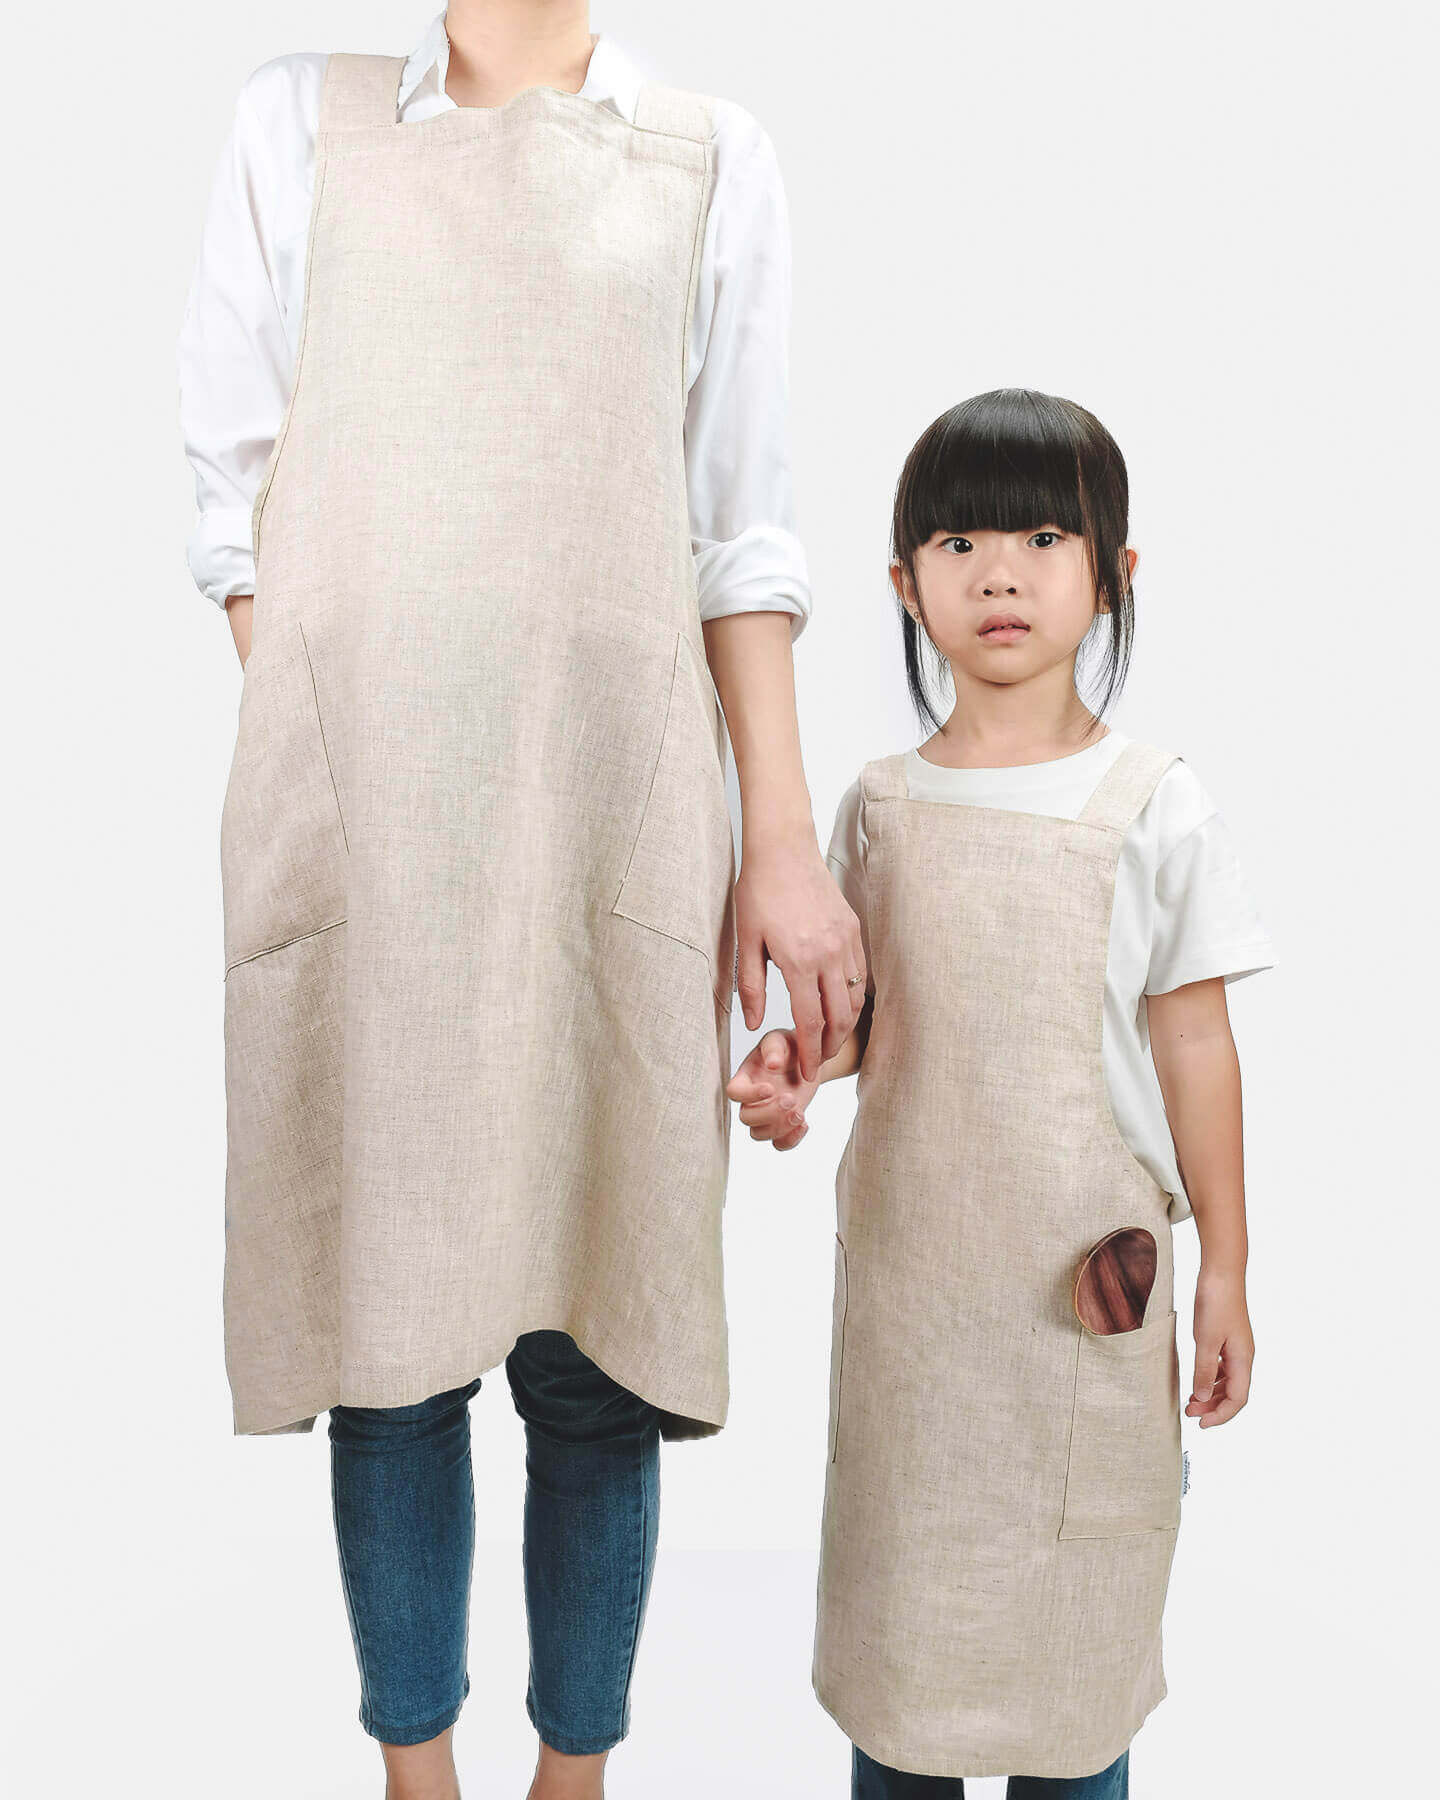 ava and ava ph mother and child wearing natural colored pure linen crossback apron with pockets. outfit for cooking arts and crafts